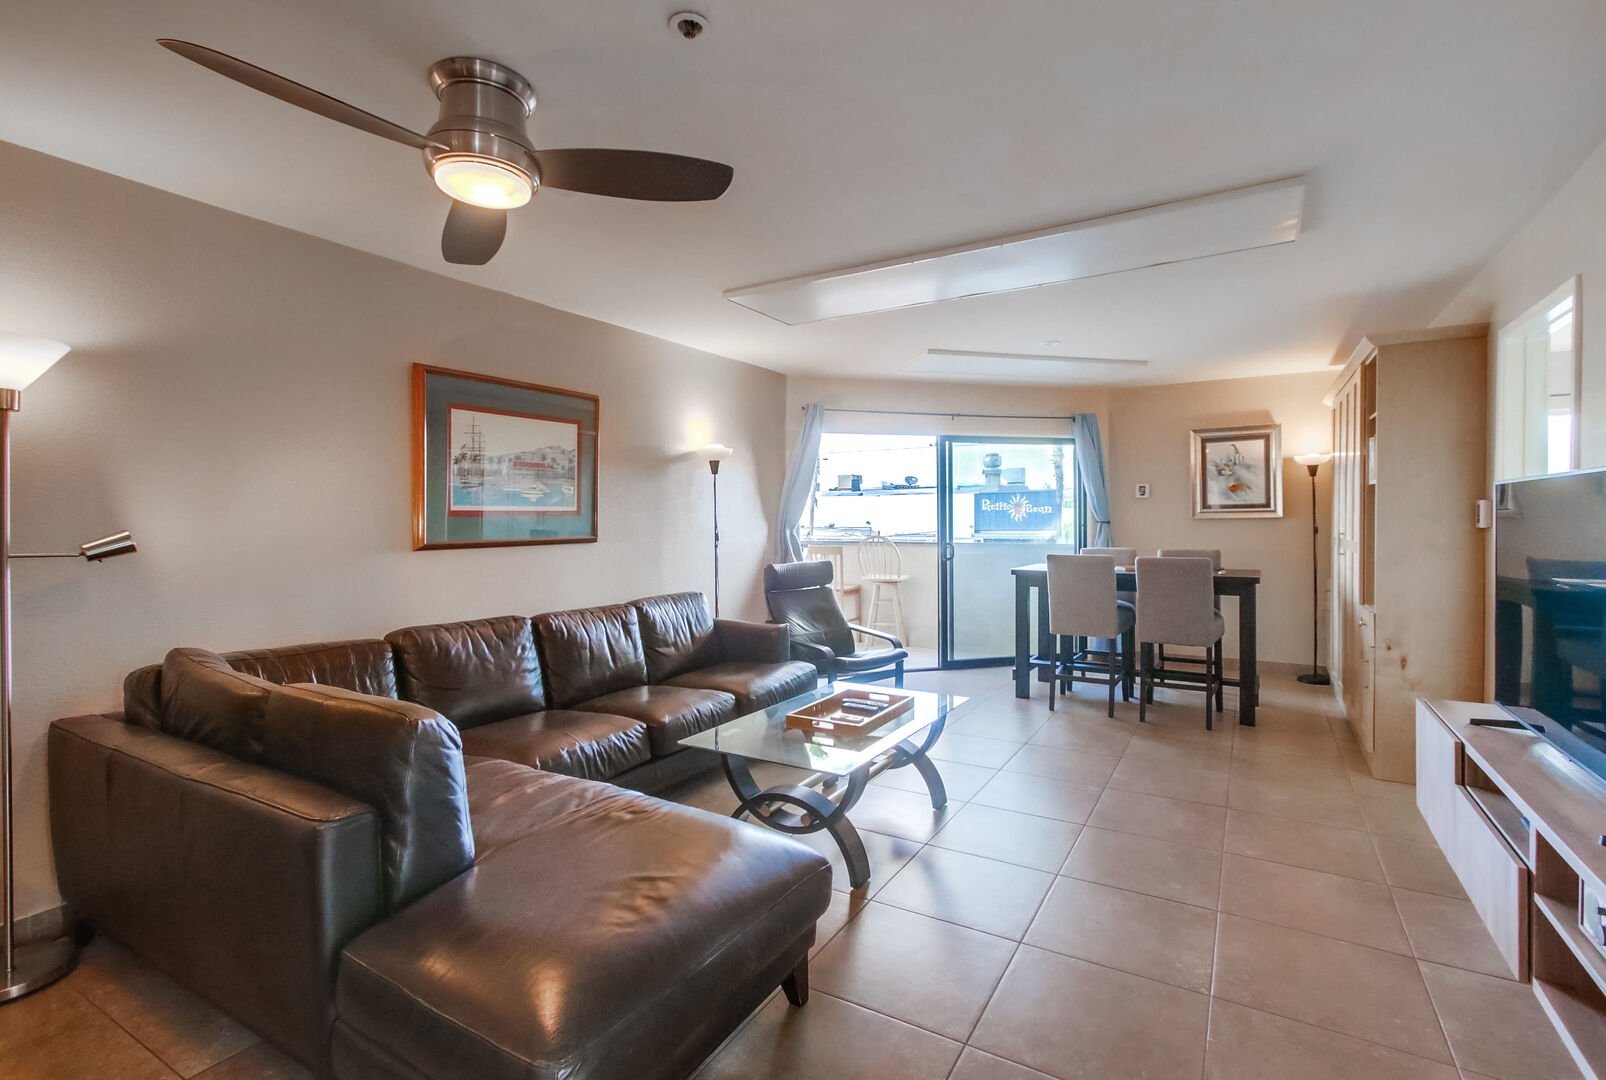 Large sofa, smart TV, dining table, ceiling fan and balcony with corner ocean and boardwalk views!